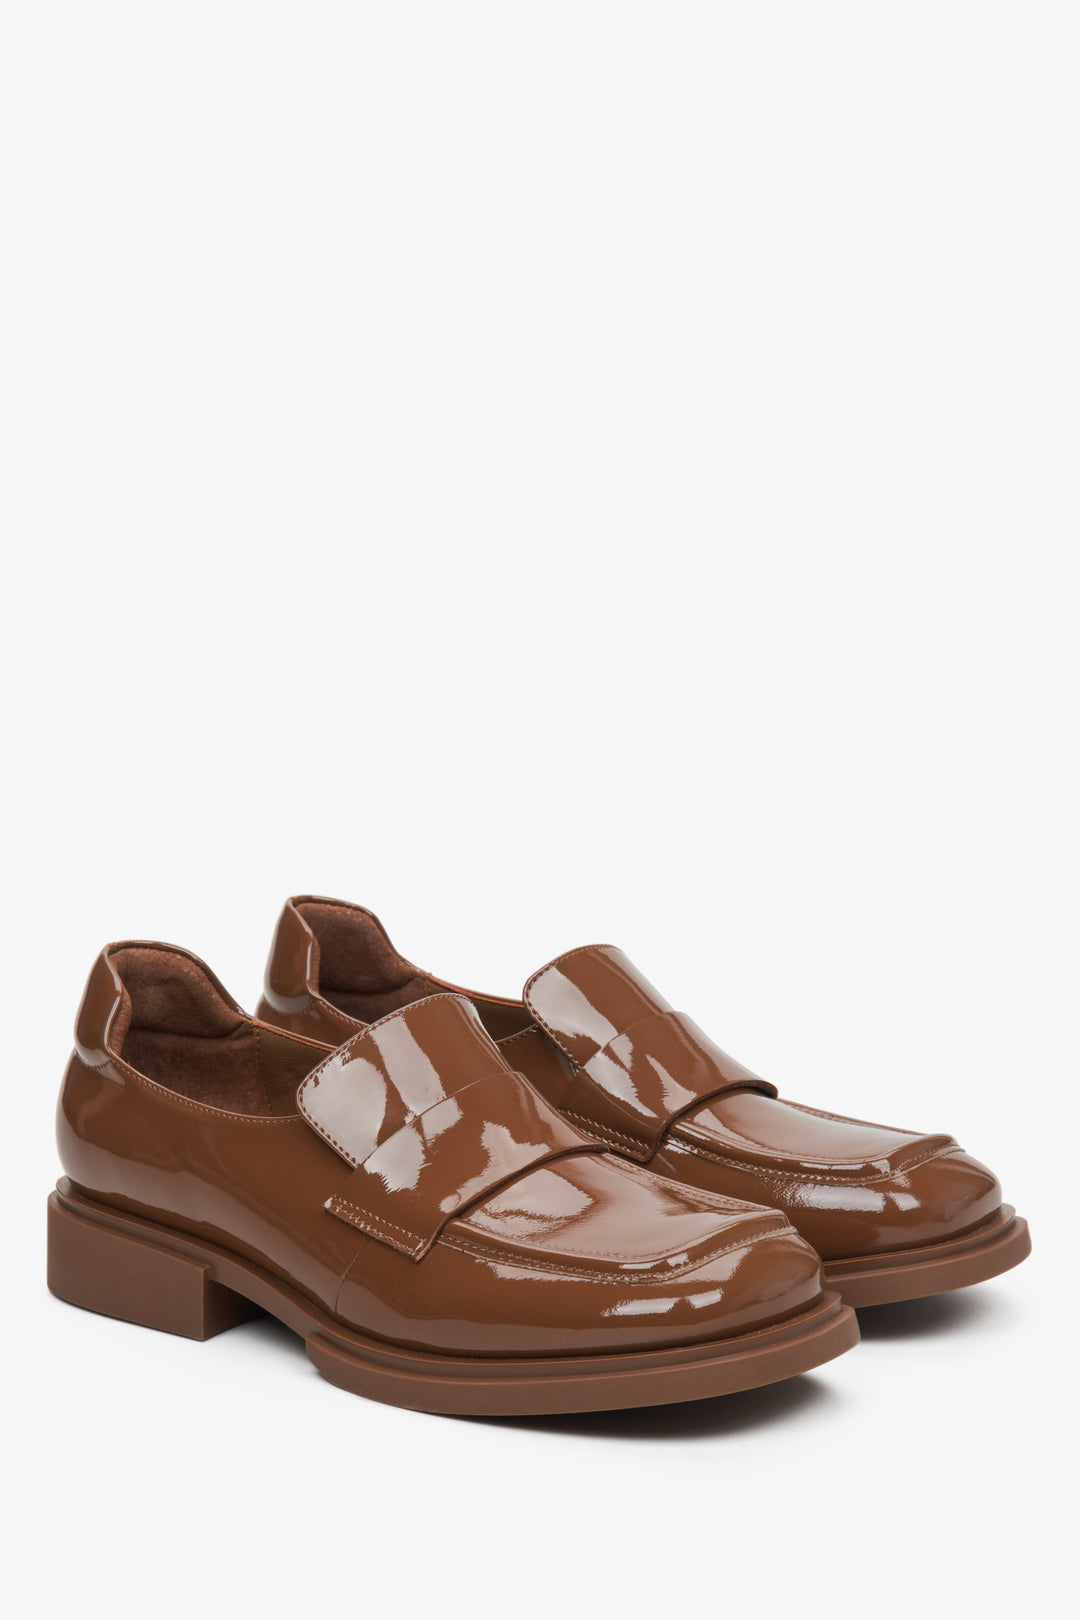 Women's brown moccasins made of patent genuine leather by Estro.